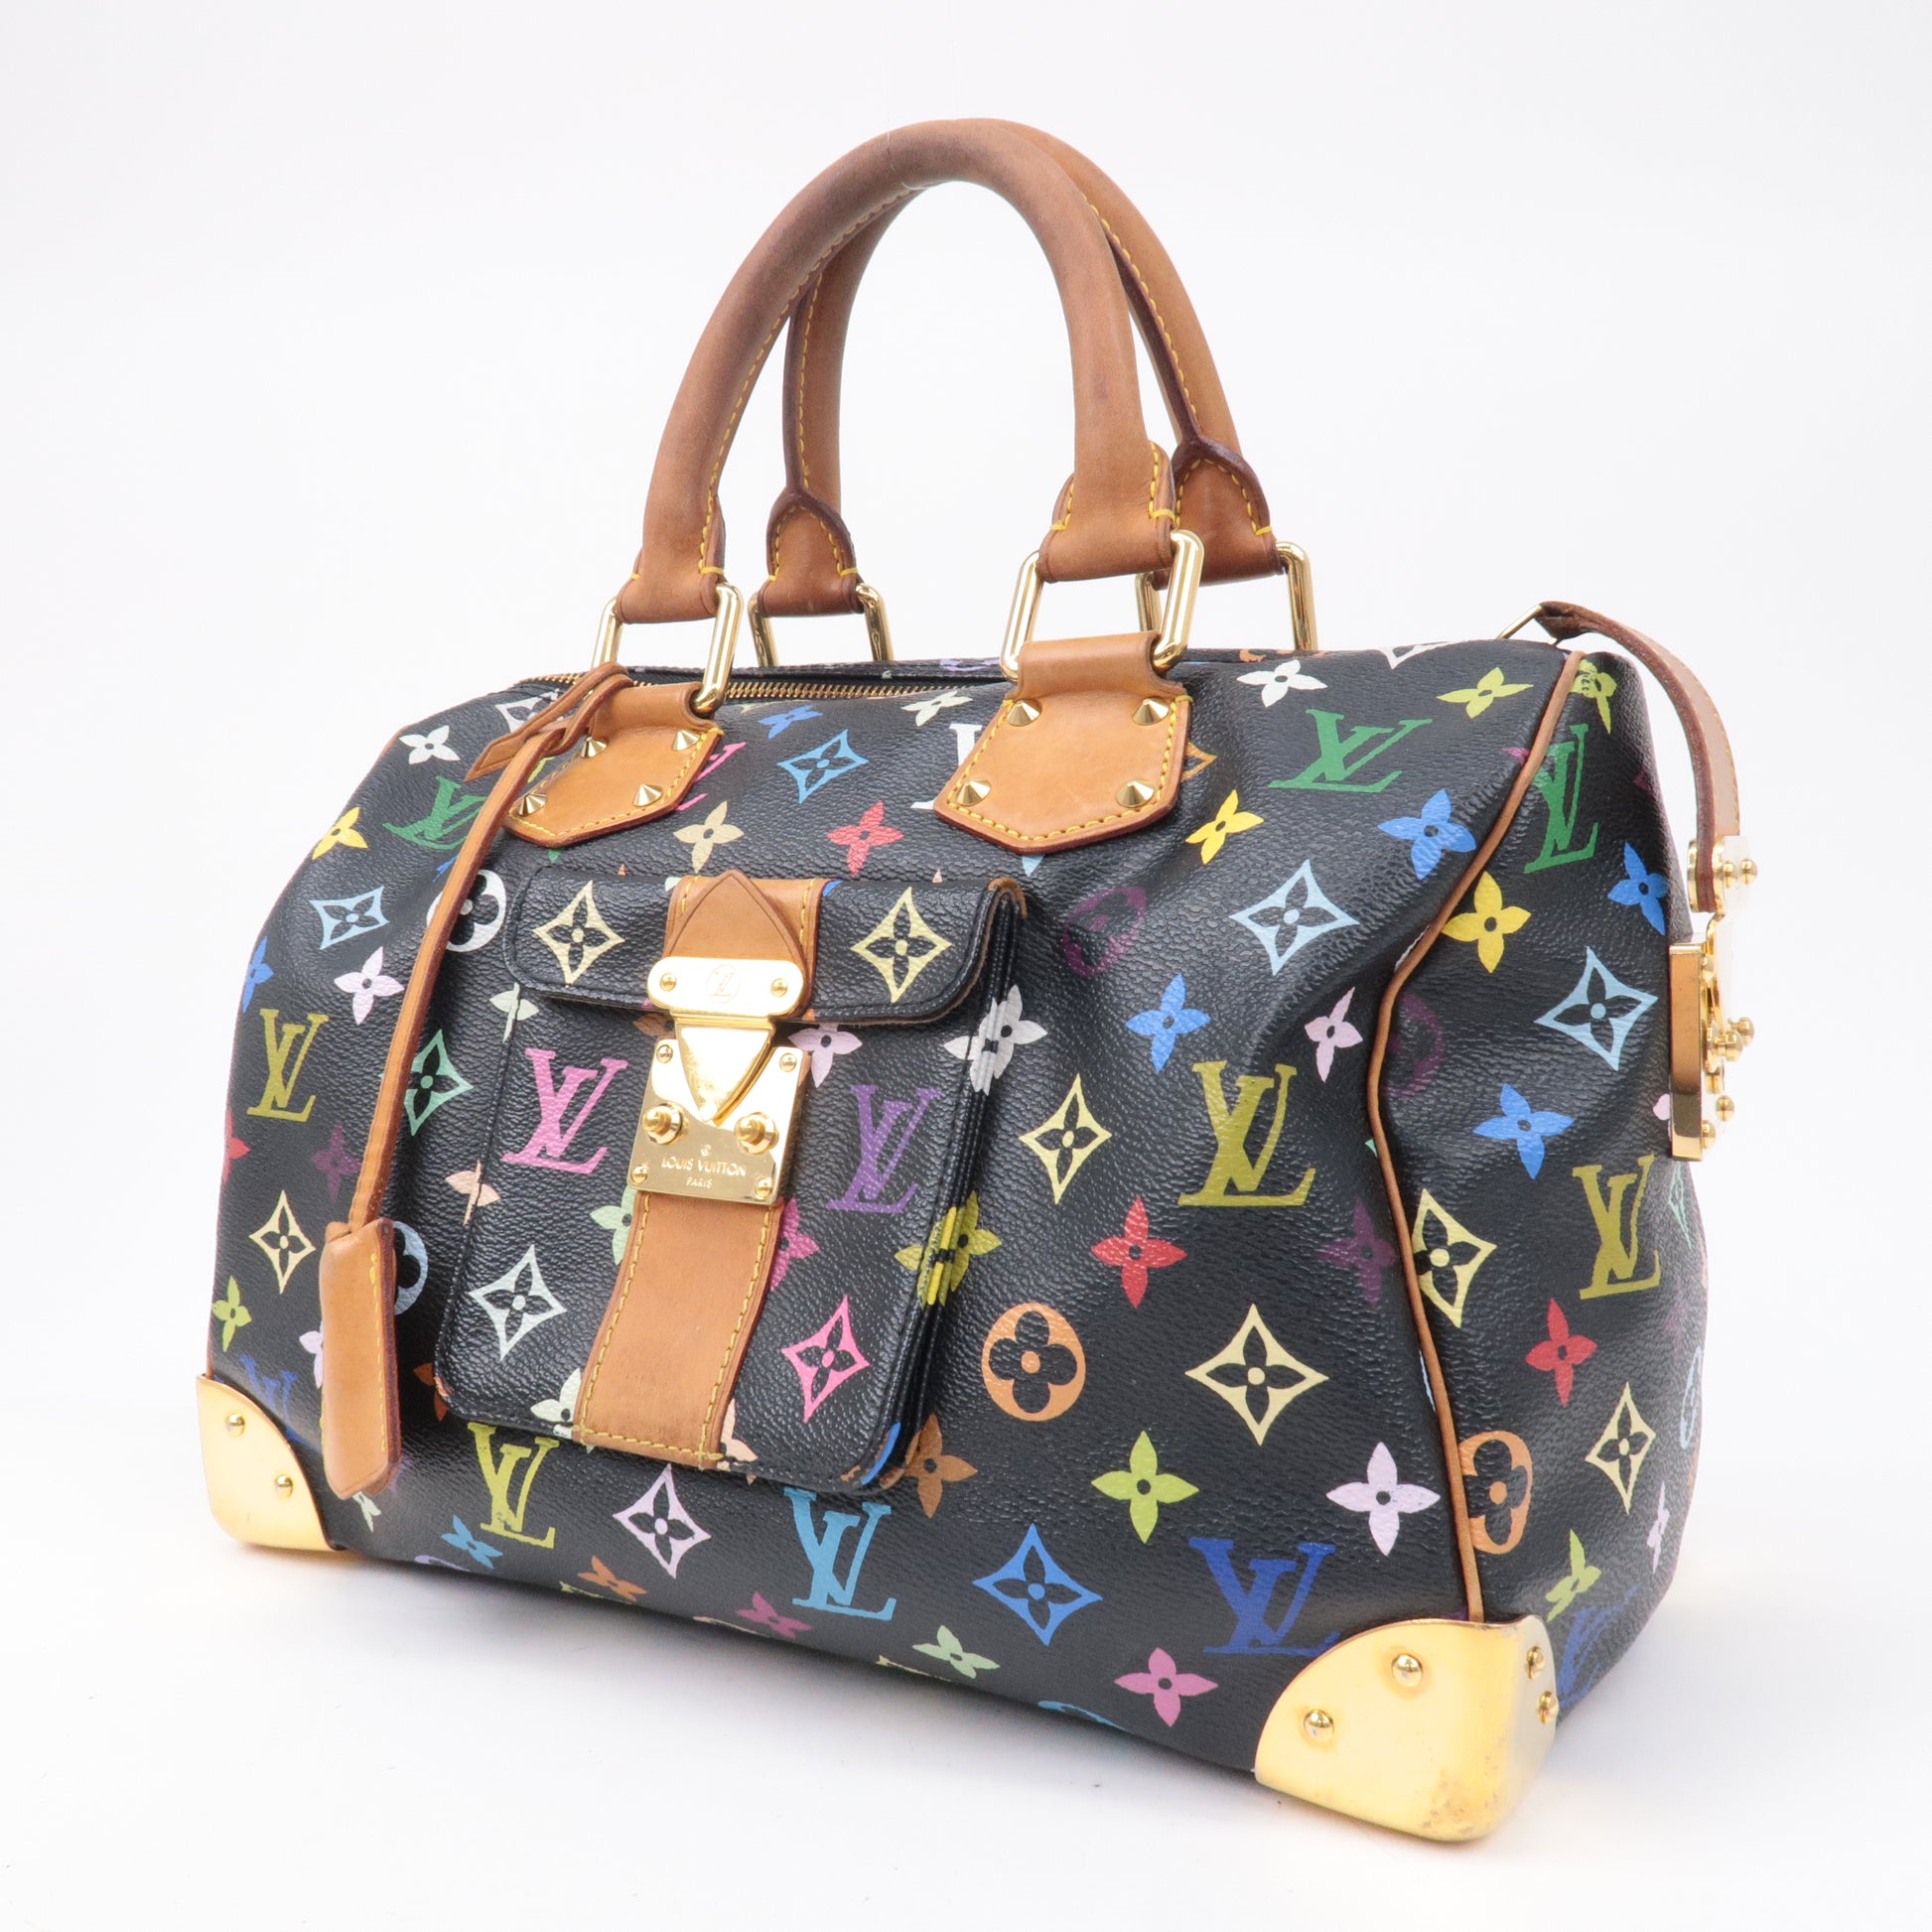 After 9 years I got my Louis Vuitton Black Multicolor Speedy 30